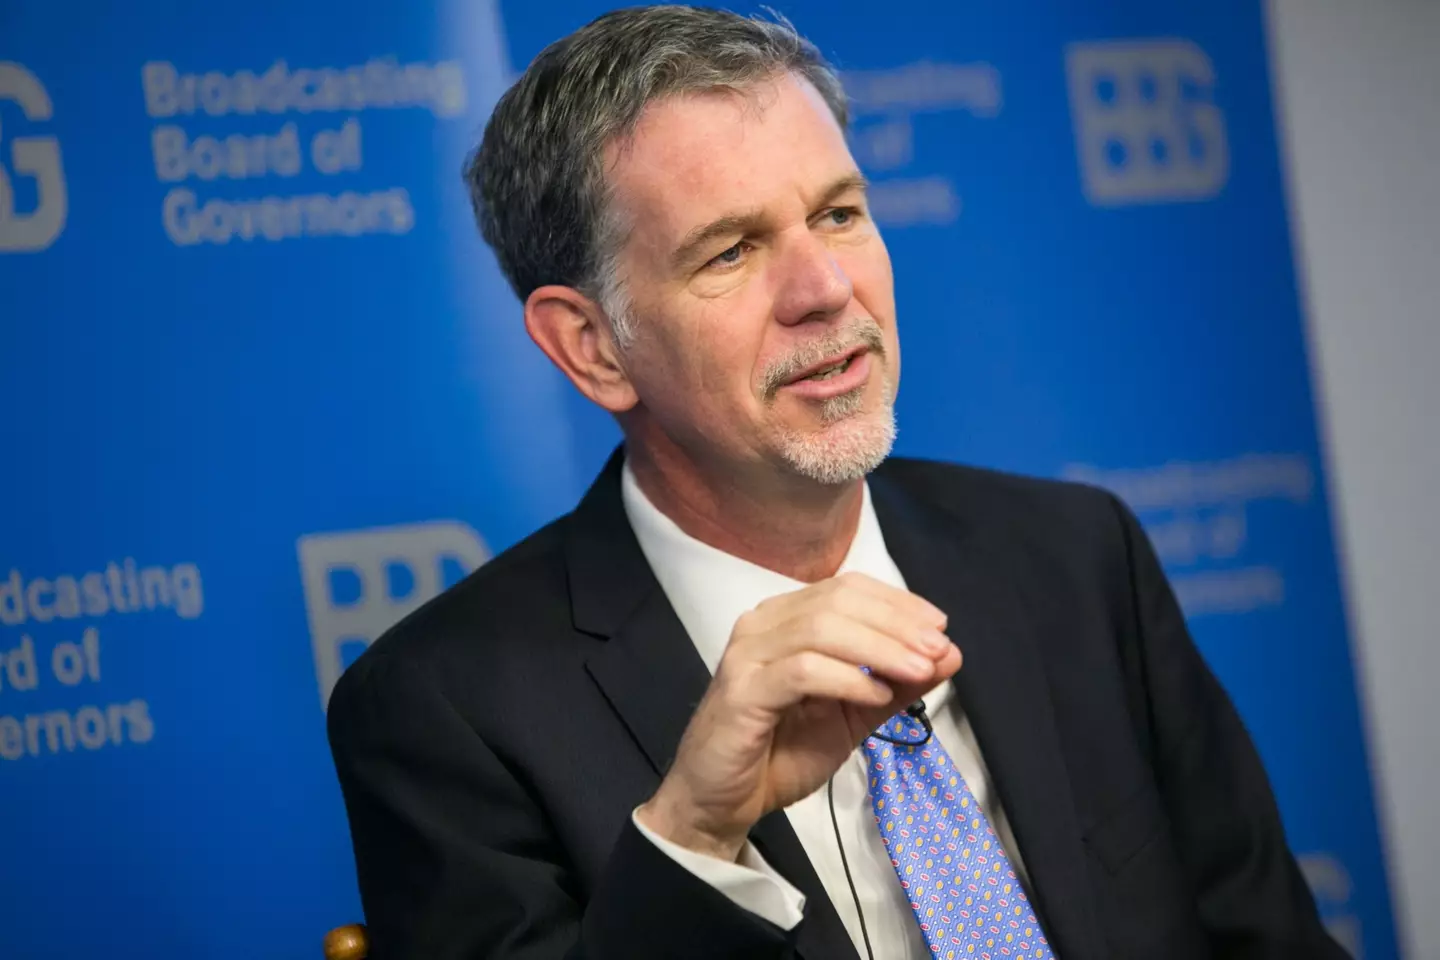 Netflix boss Reed Hastings first announced the shift to ads in April.